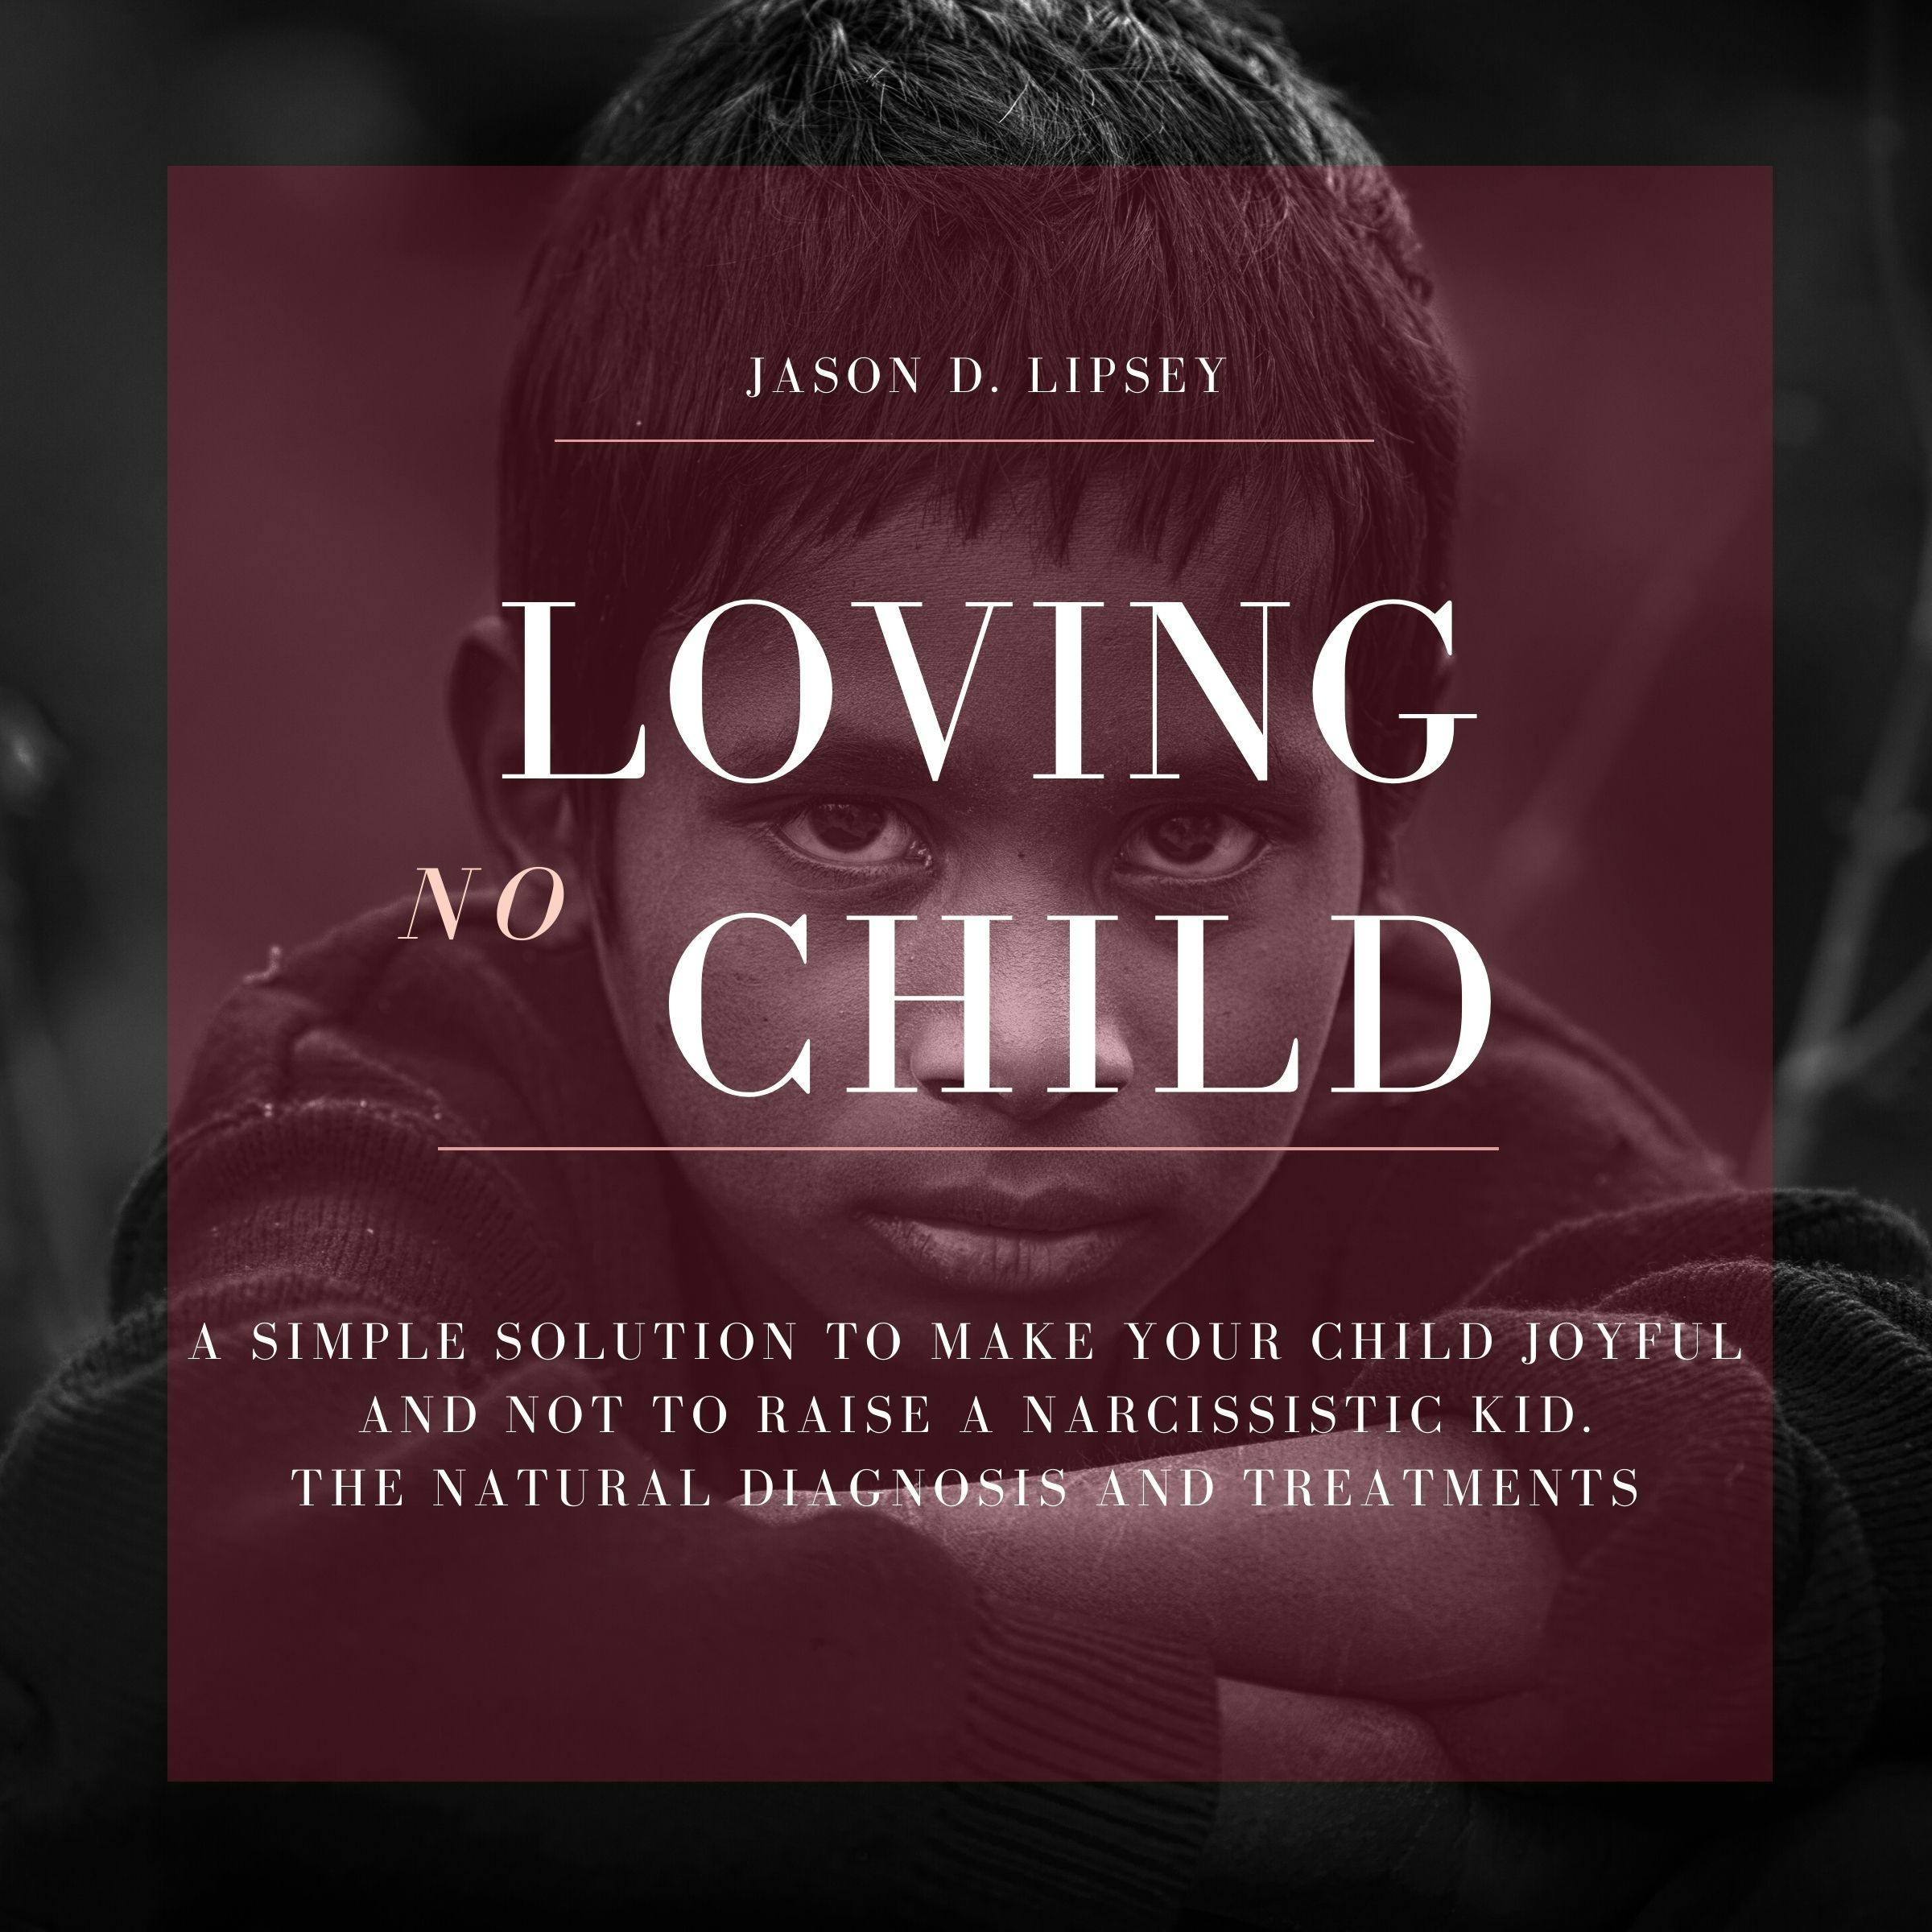 No-Loving Child: A Simple Solution To Make Your Child Joyful And Not To Raise a Narcissistic Kid. The Natural Diagnosis And Treatments - Jason D. lipsey